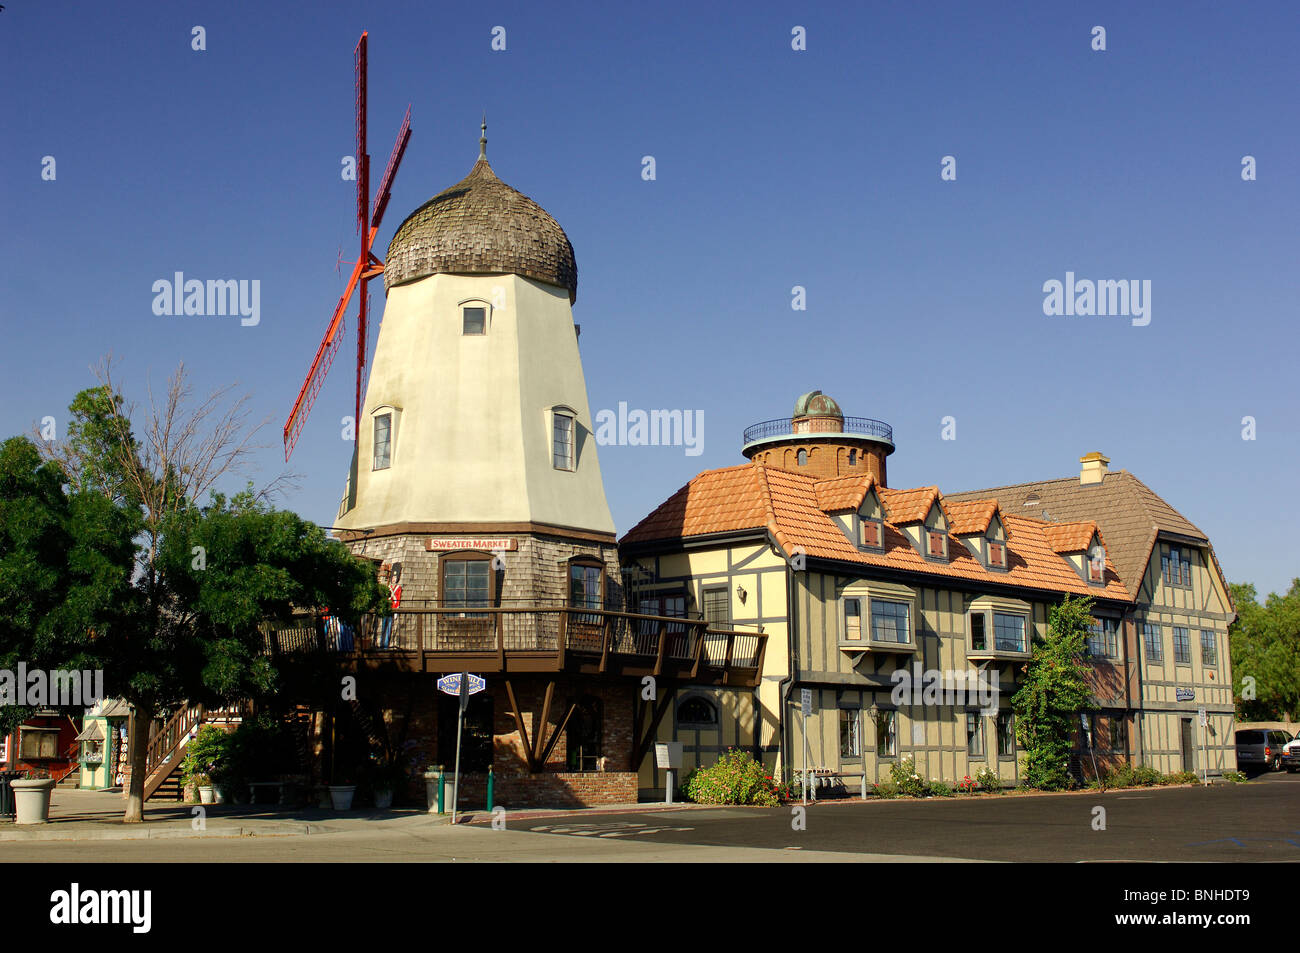 Usa Solvang California Windmill Half-Timbered Houses Danish European Village Small Town Touristic Tourists Tourism Attraction Stock Photo